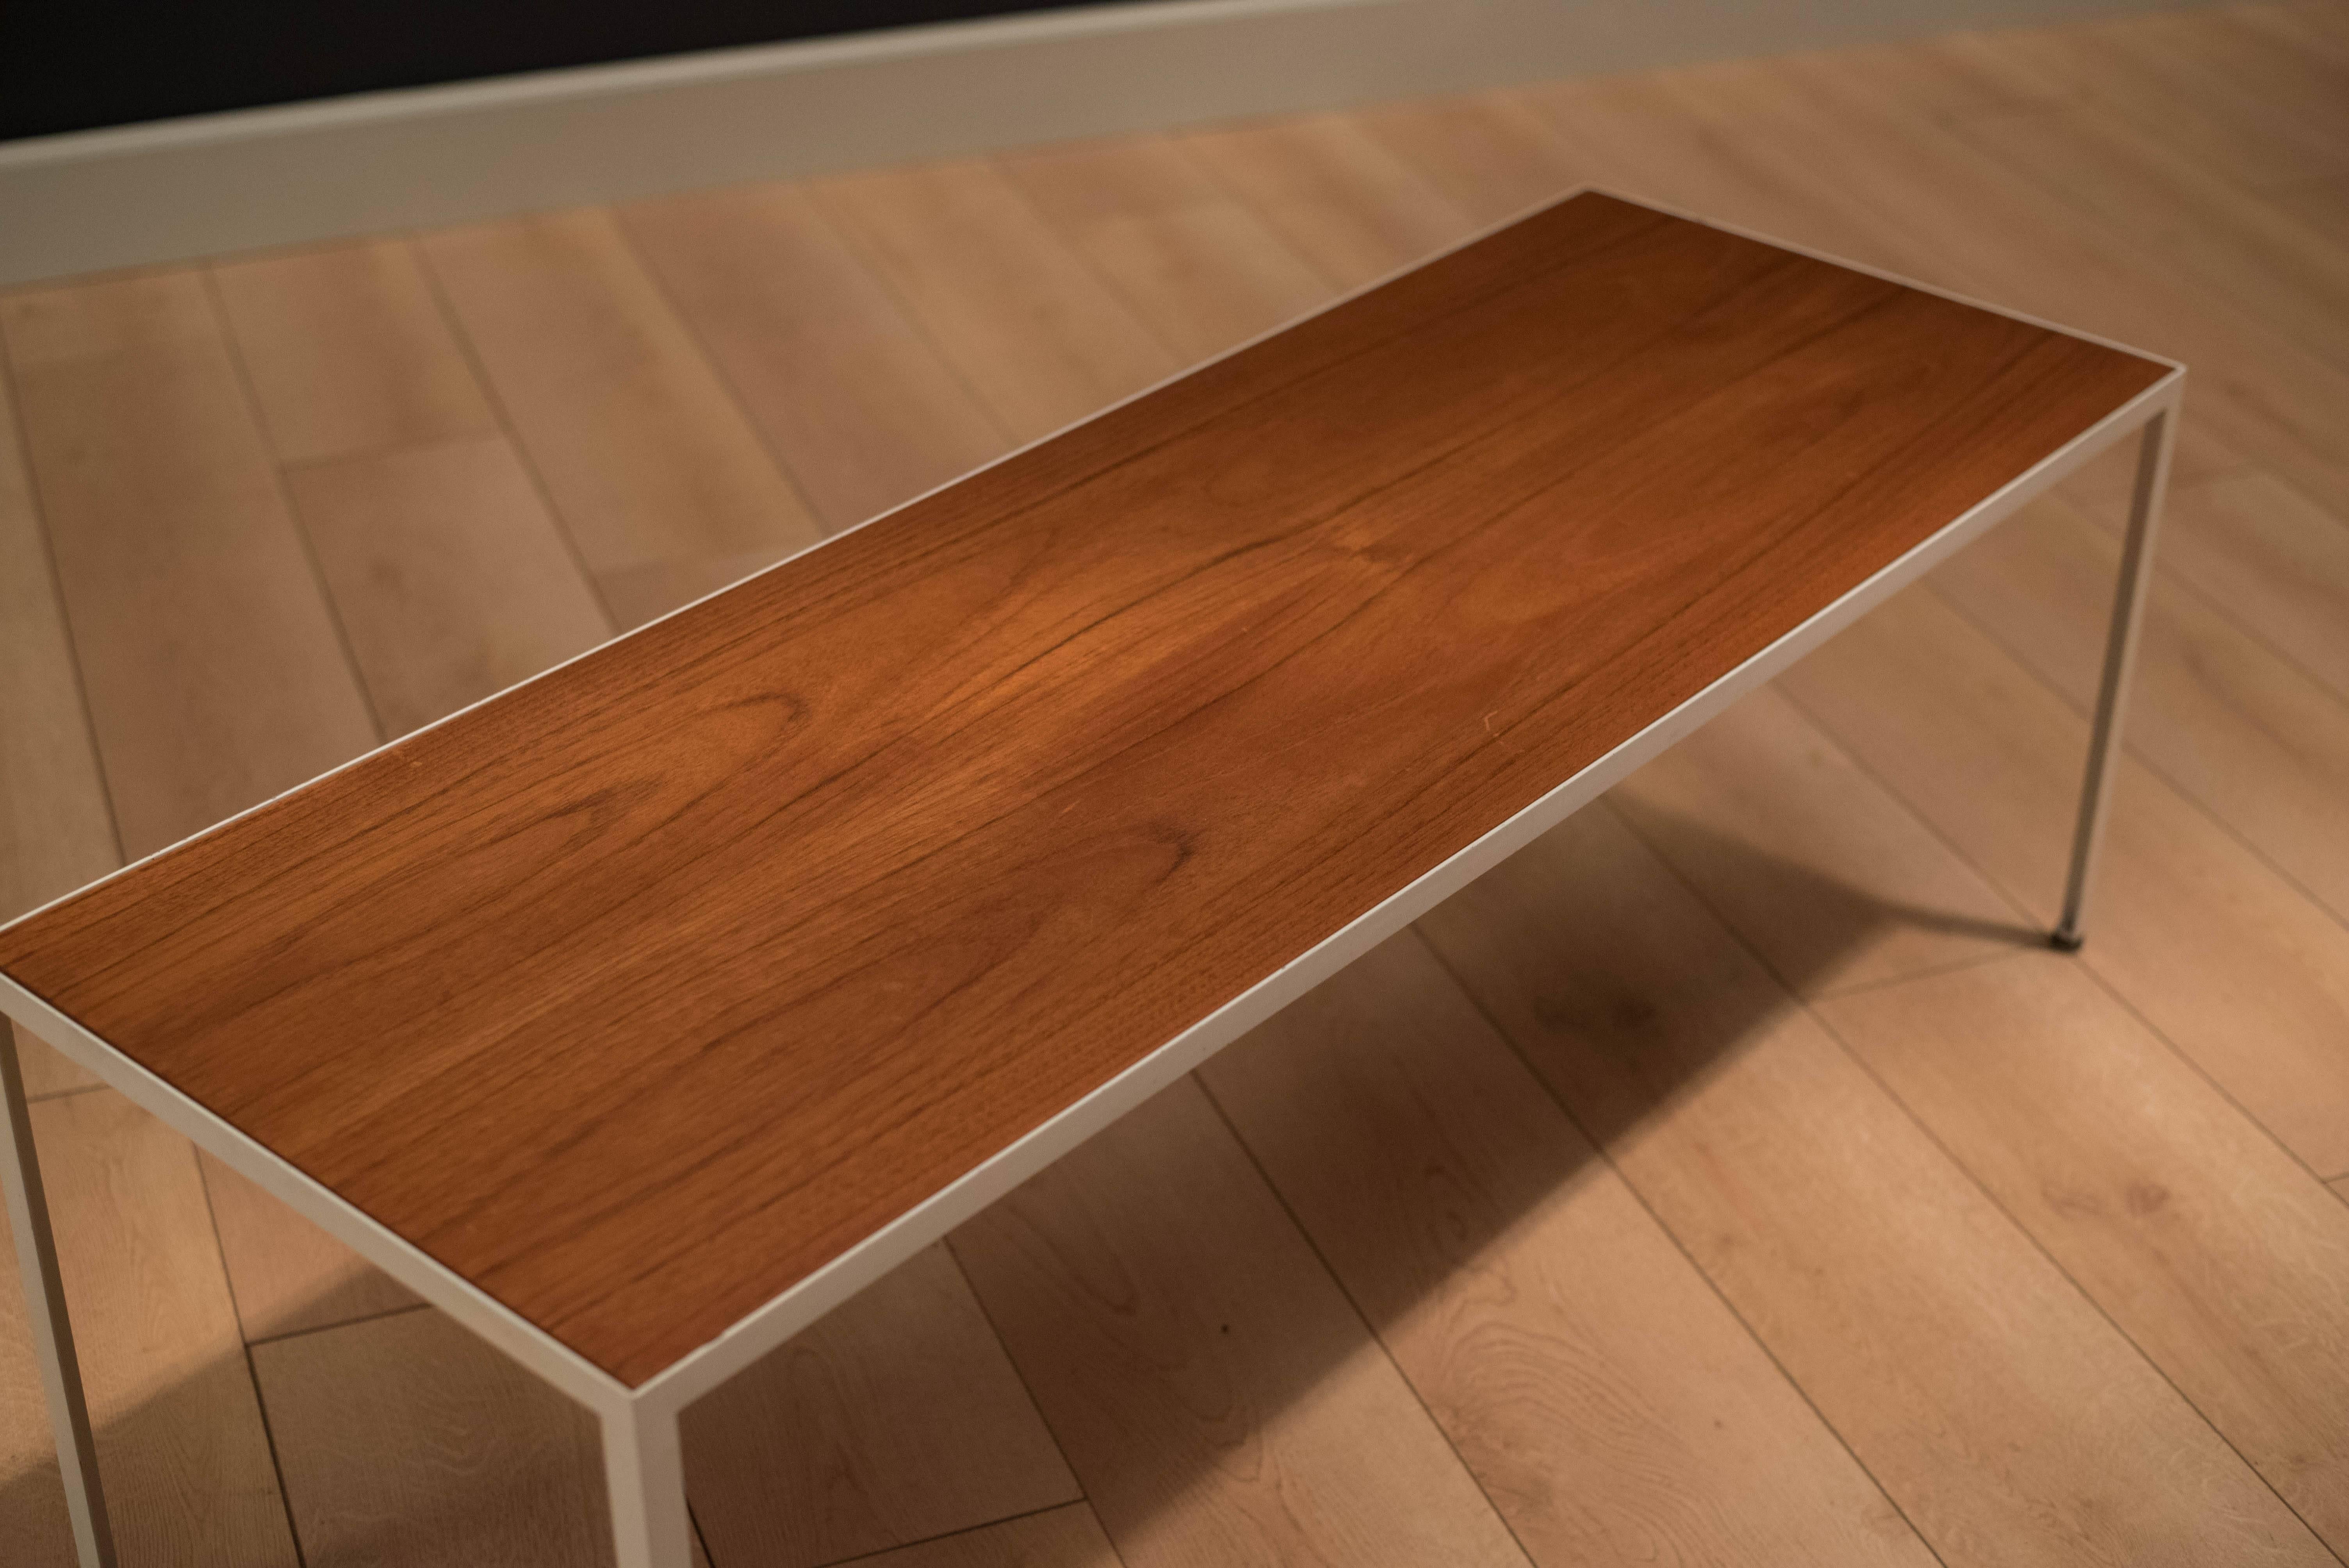 Mid-Century coffee table by George Nelson for Herman Miller model no. 5150. This piece has a teak tabletop with a contrasting white coated enameled steel base.

          